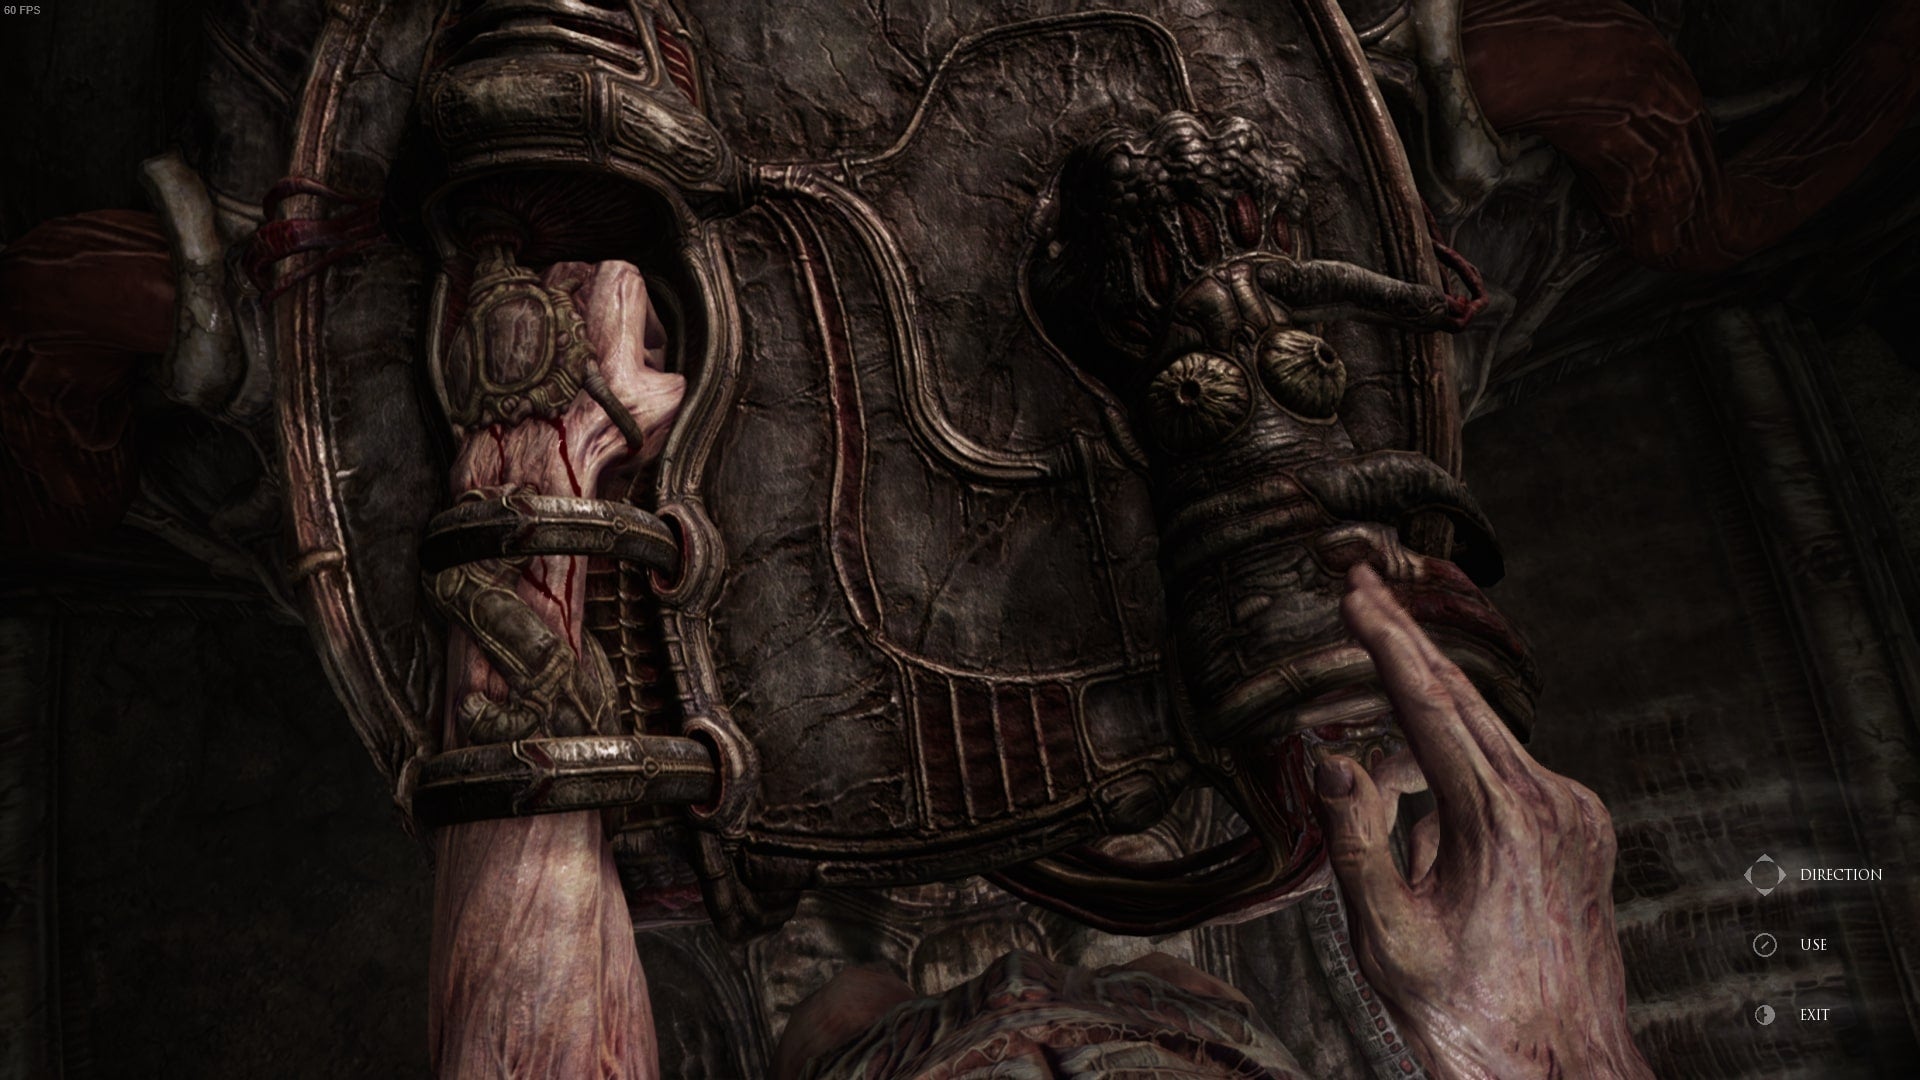 A pillar that requires the player to insert both of their arms inside is shown in Scorn's Act 1